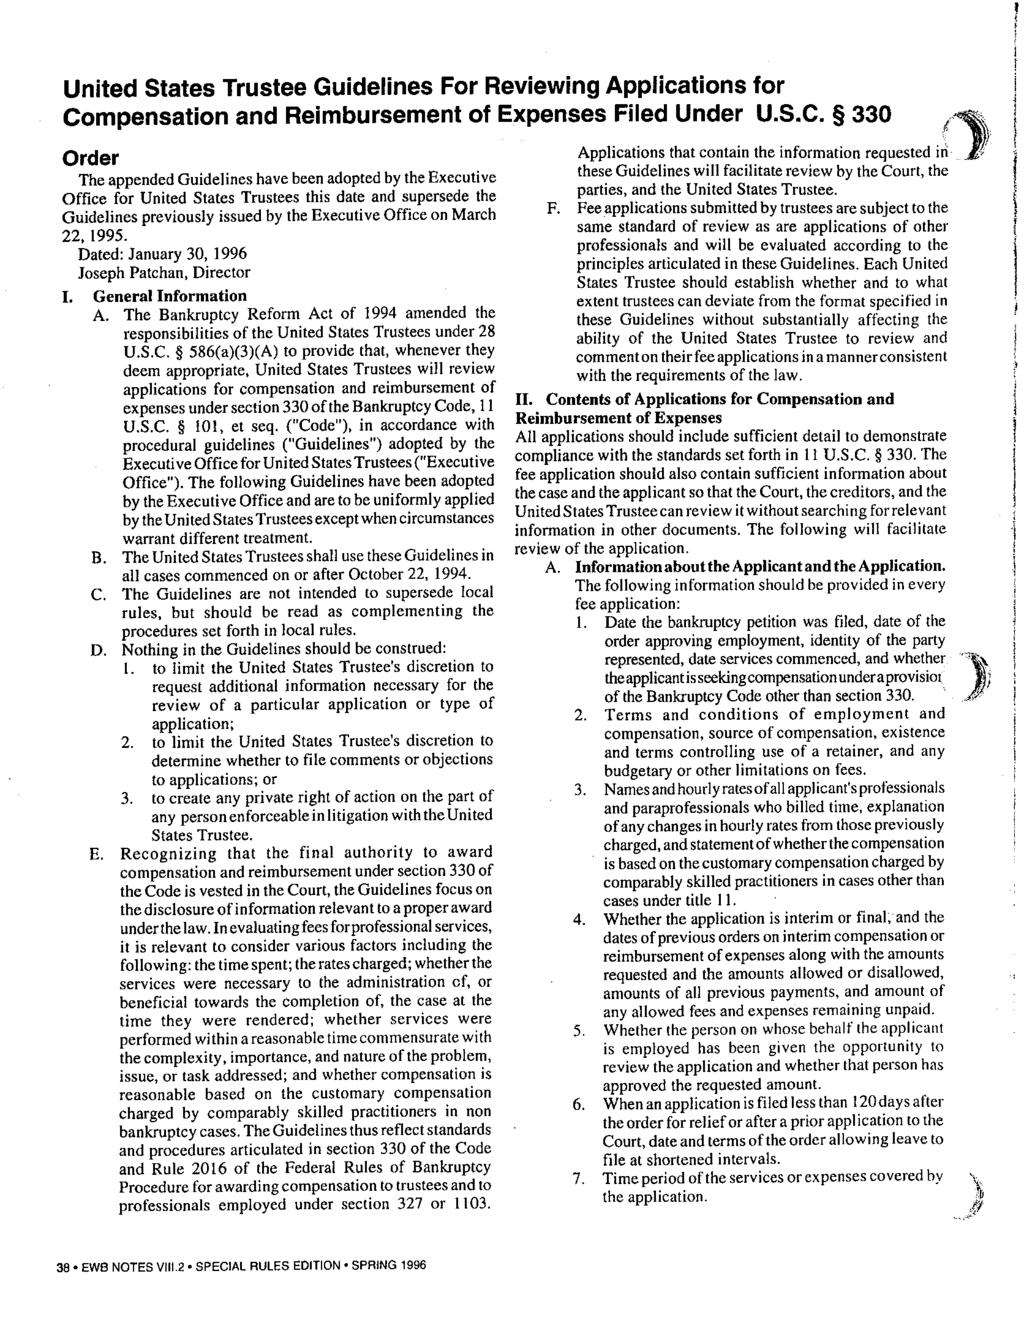 United States Trustee Guidelines For Reviewing Applications for Co